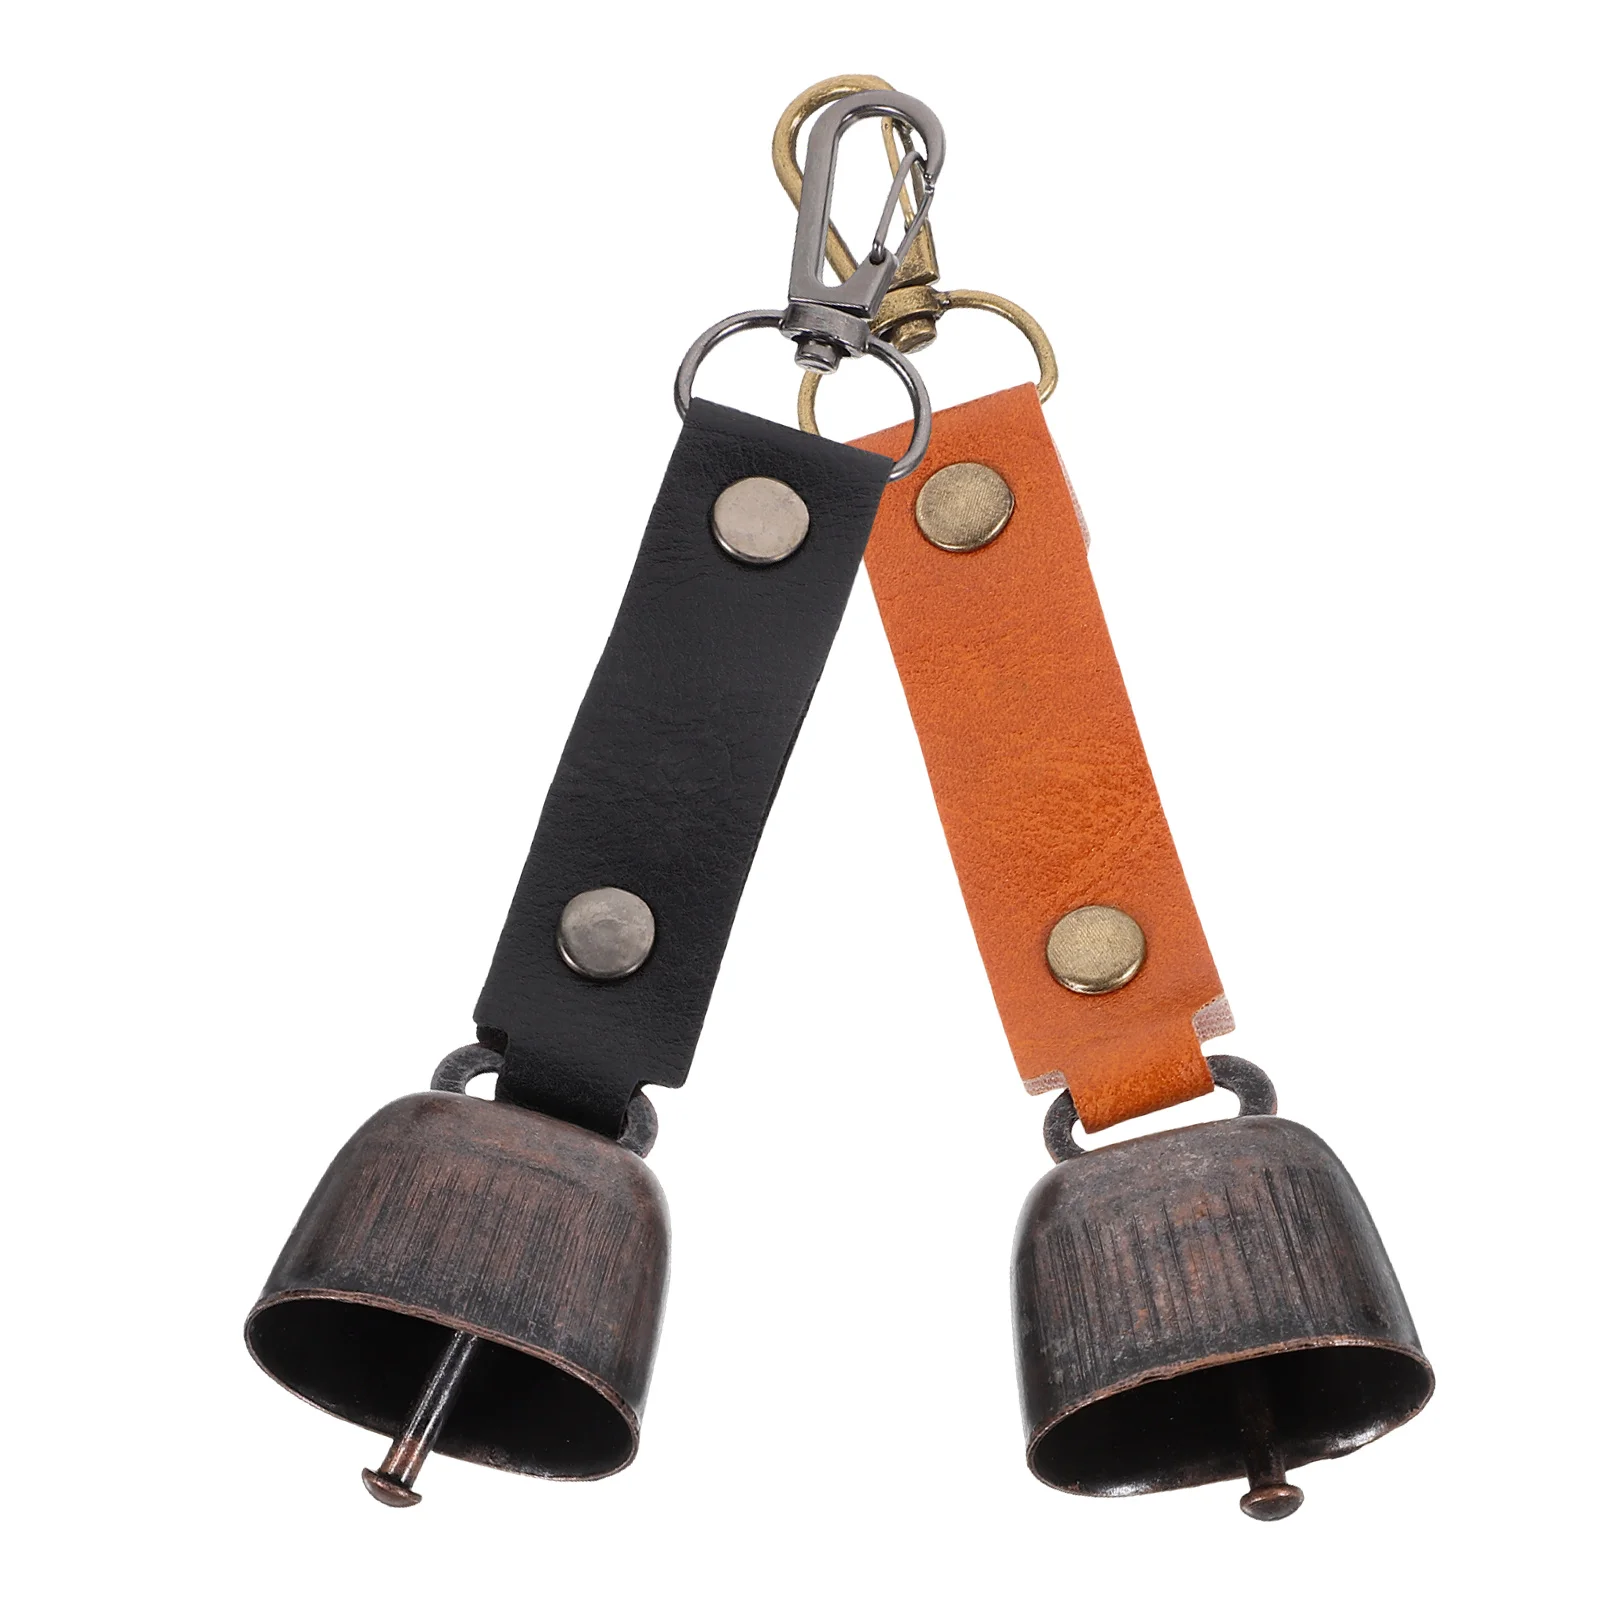 

2 Pcs Outdoor Bell Pendant Key Fob Bear Hiking Bells for Camping Cattle Cow Pets Small Traveling